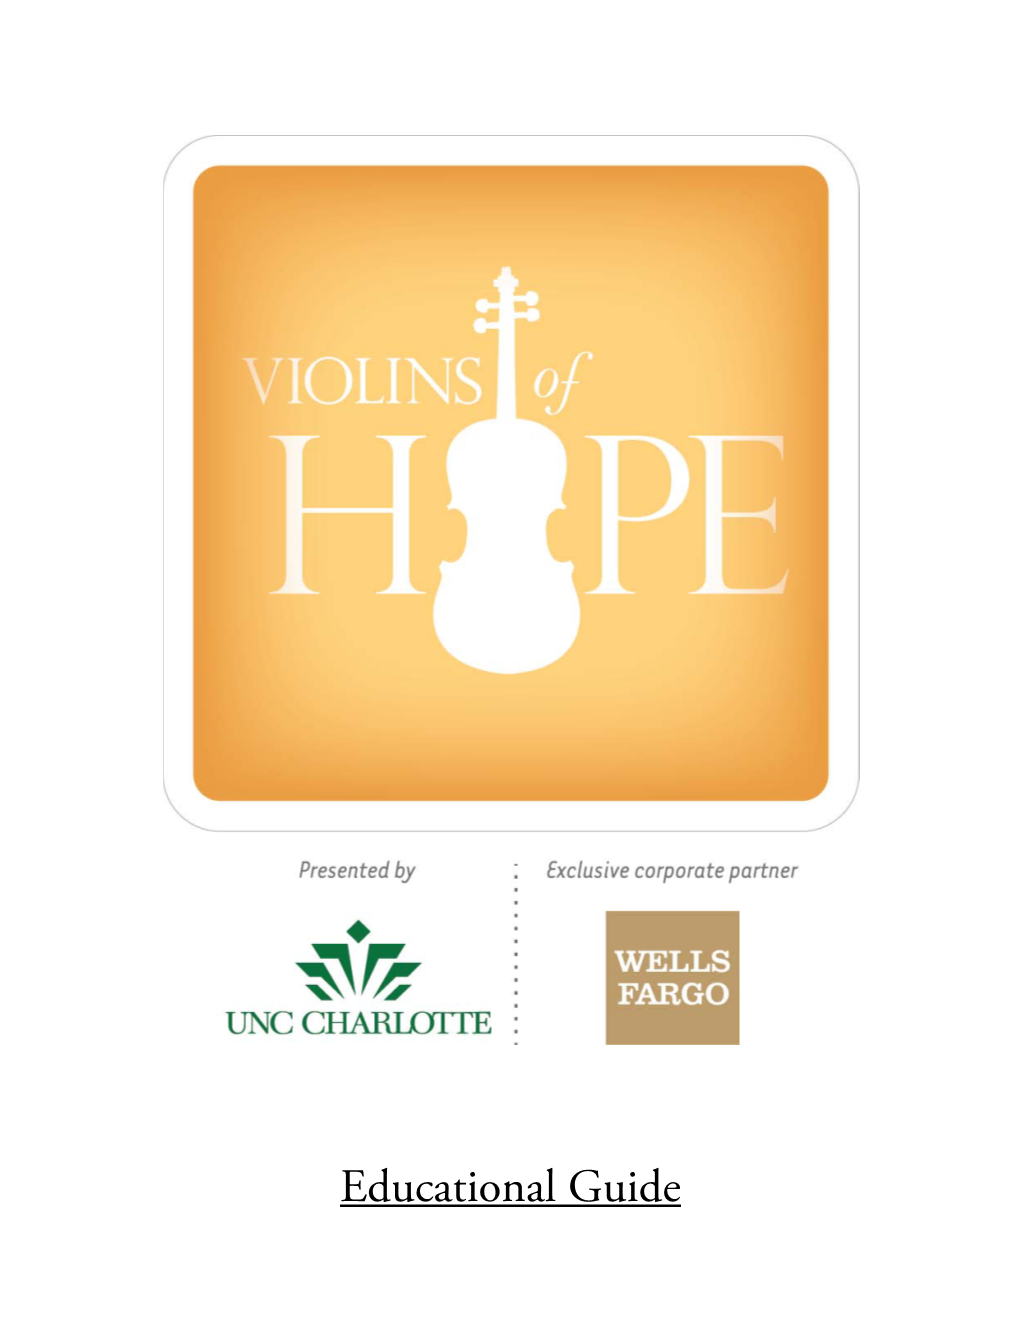 Educational Guide Violins of Hope Partners Presented by UNC Charlotte